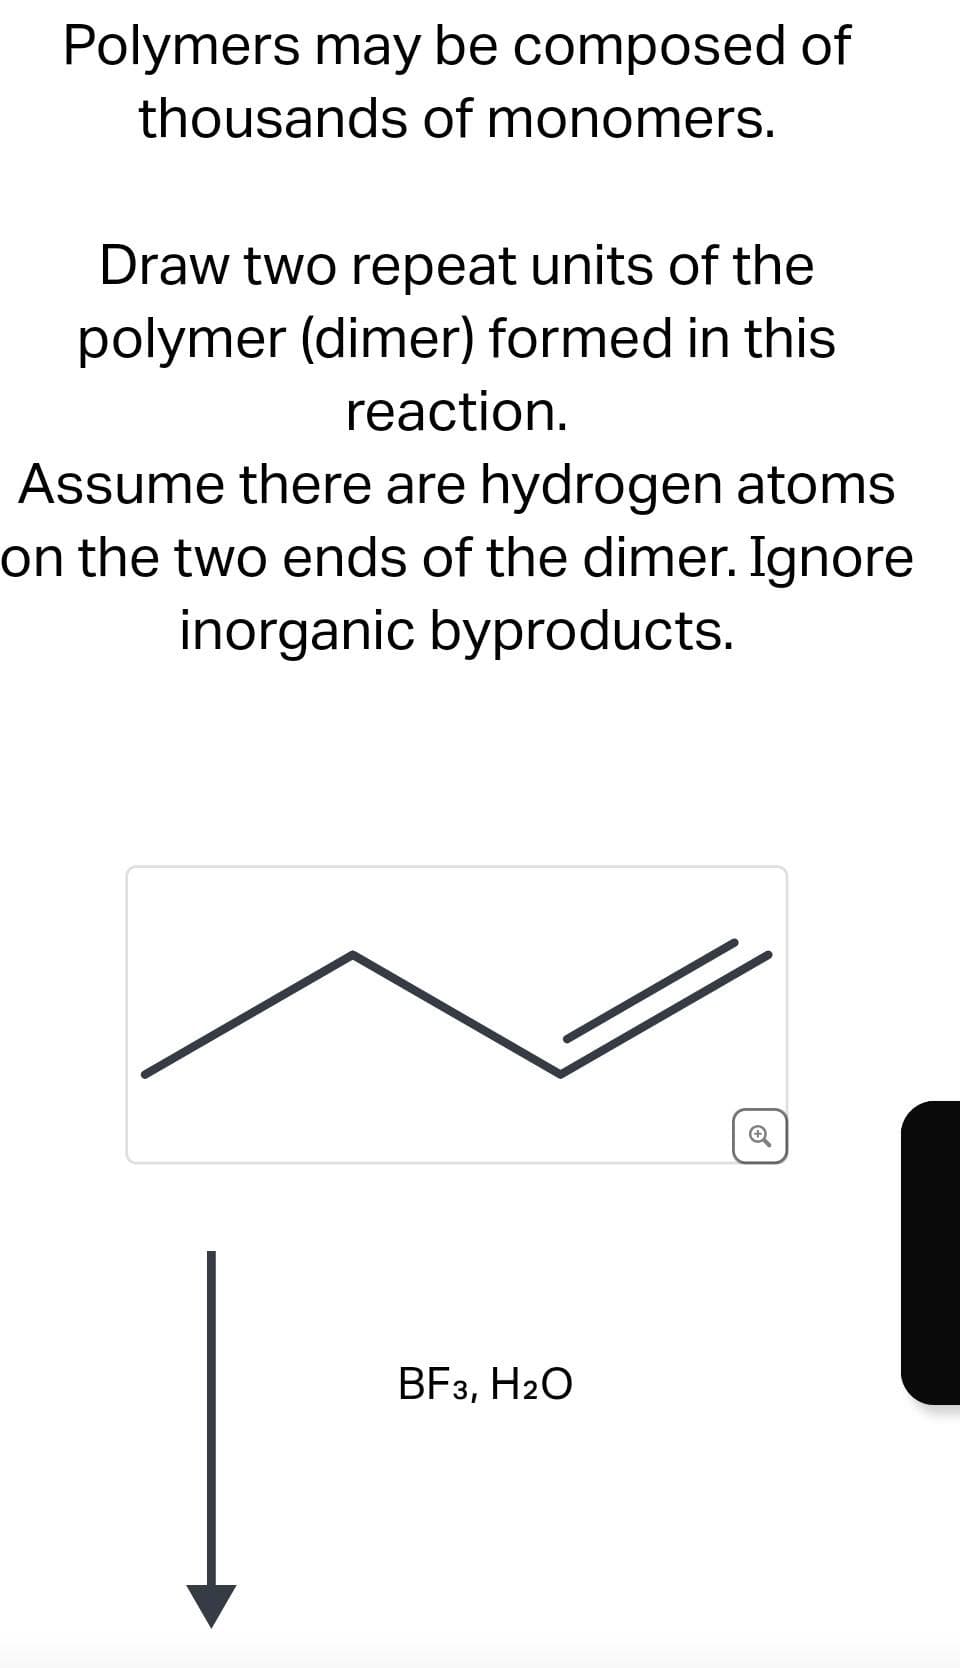 Polymers may be composed of
thousands of monomers.
Draw two repeat units of the
polymer (dimer) formed in this
reaction.
Assume there are hydrogen atoms
on the two ends of the dimer. Ignore
inorganic byproducts.
BF3, H₂O